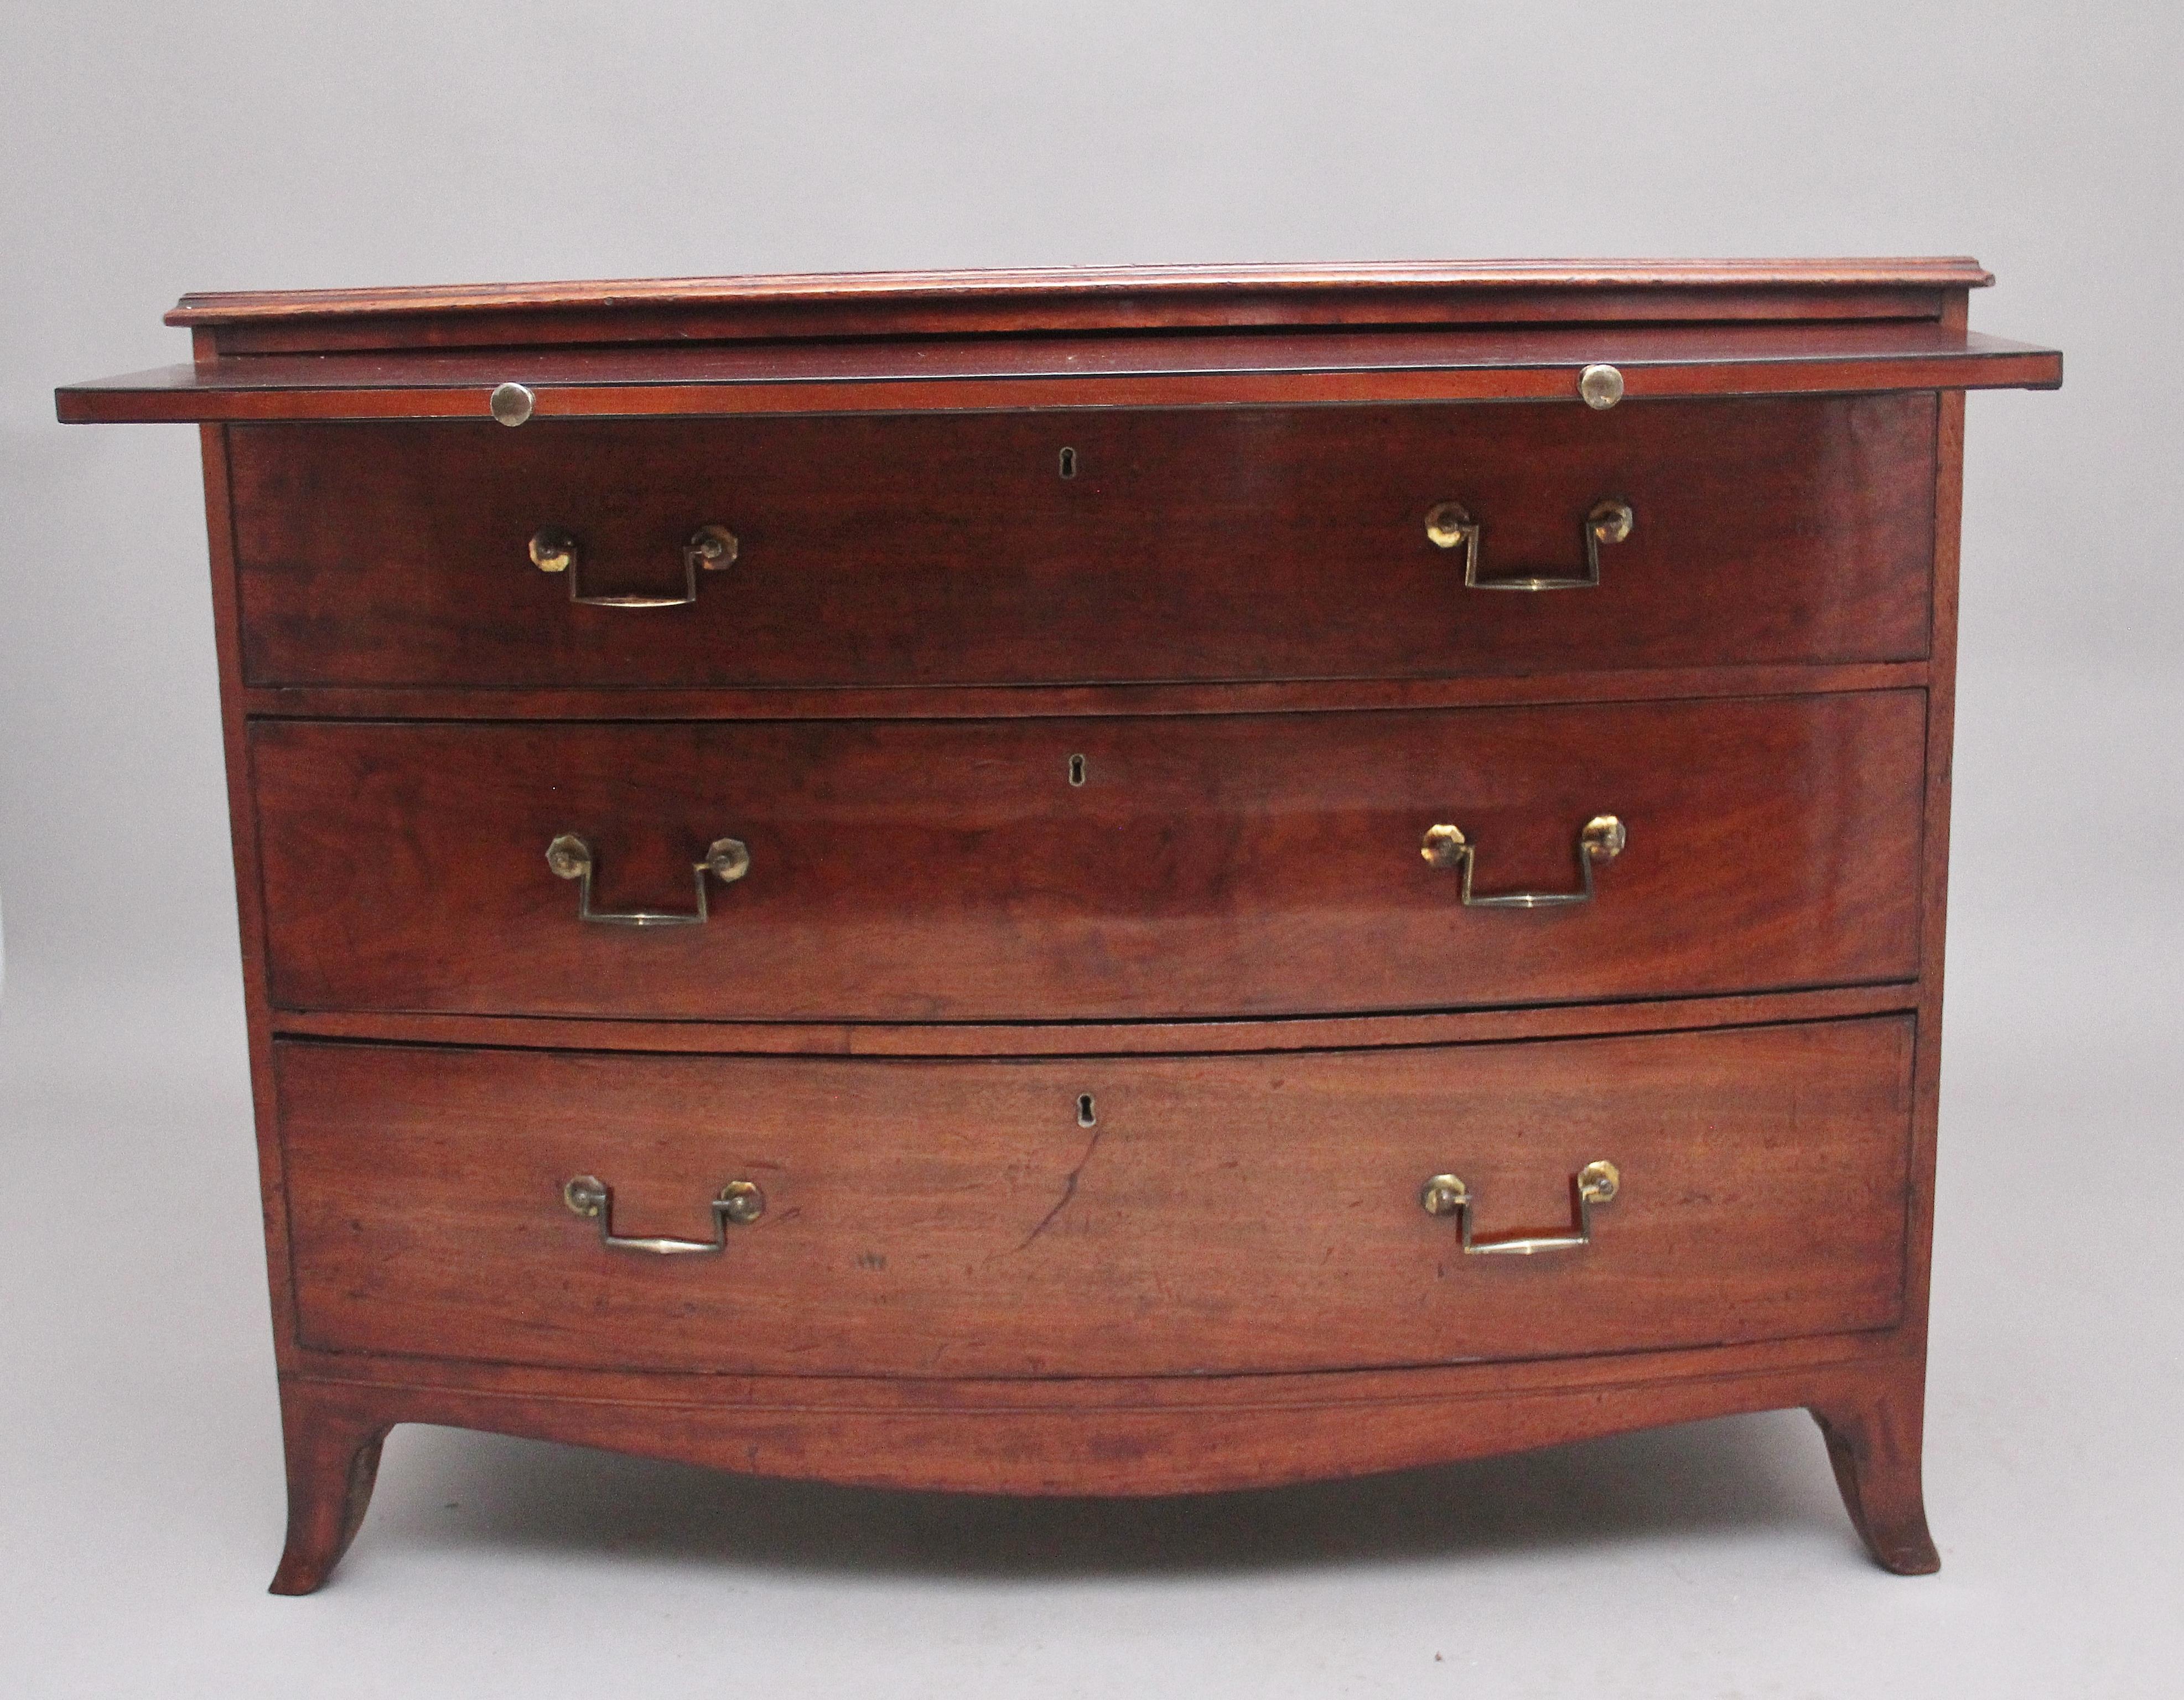 A superb quality early 19th Century mahogany bowfront chest, having a nice figured moulded edge top above a brushing slide, three deep drawers below with the original decorative brass handles, shaped apron, standing on splay feet. Circa 1800.
 